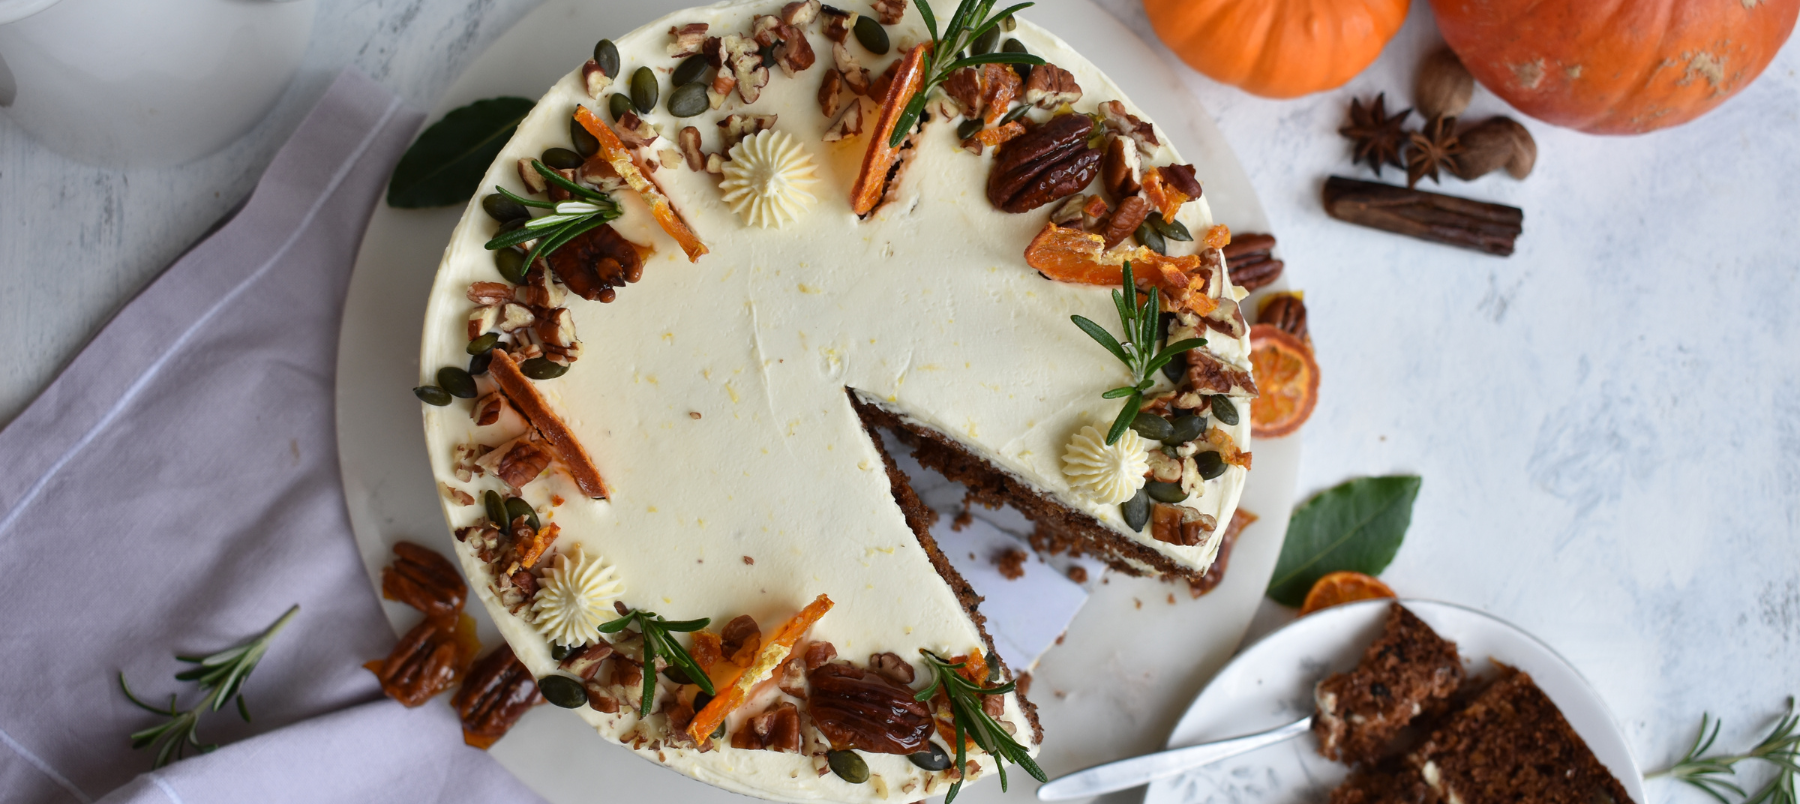 Pumpkin, Pecan, Spice Cake with Lemon Cream Cheese Frosting - Steph Blackwell